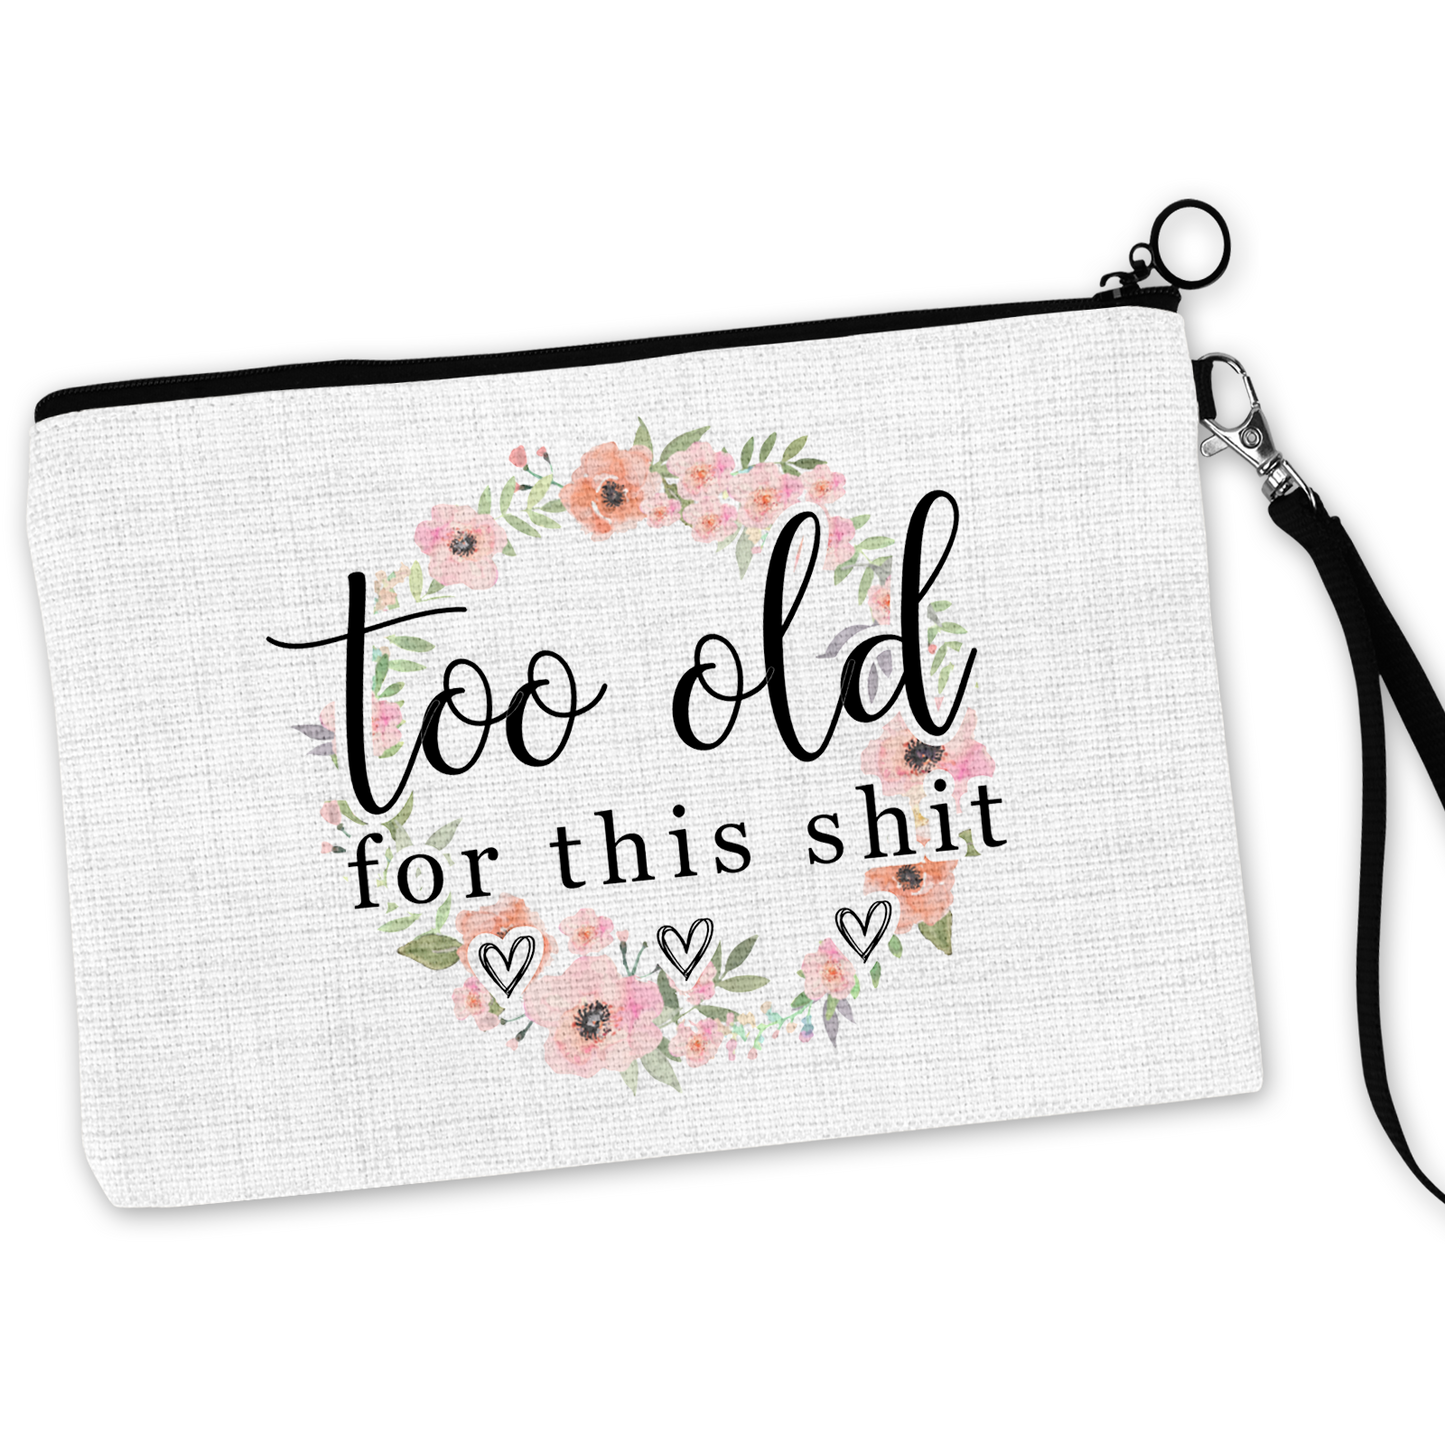 Too Old For This Shit Cosmetic Bag